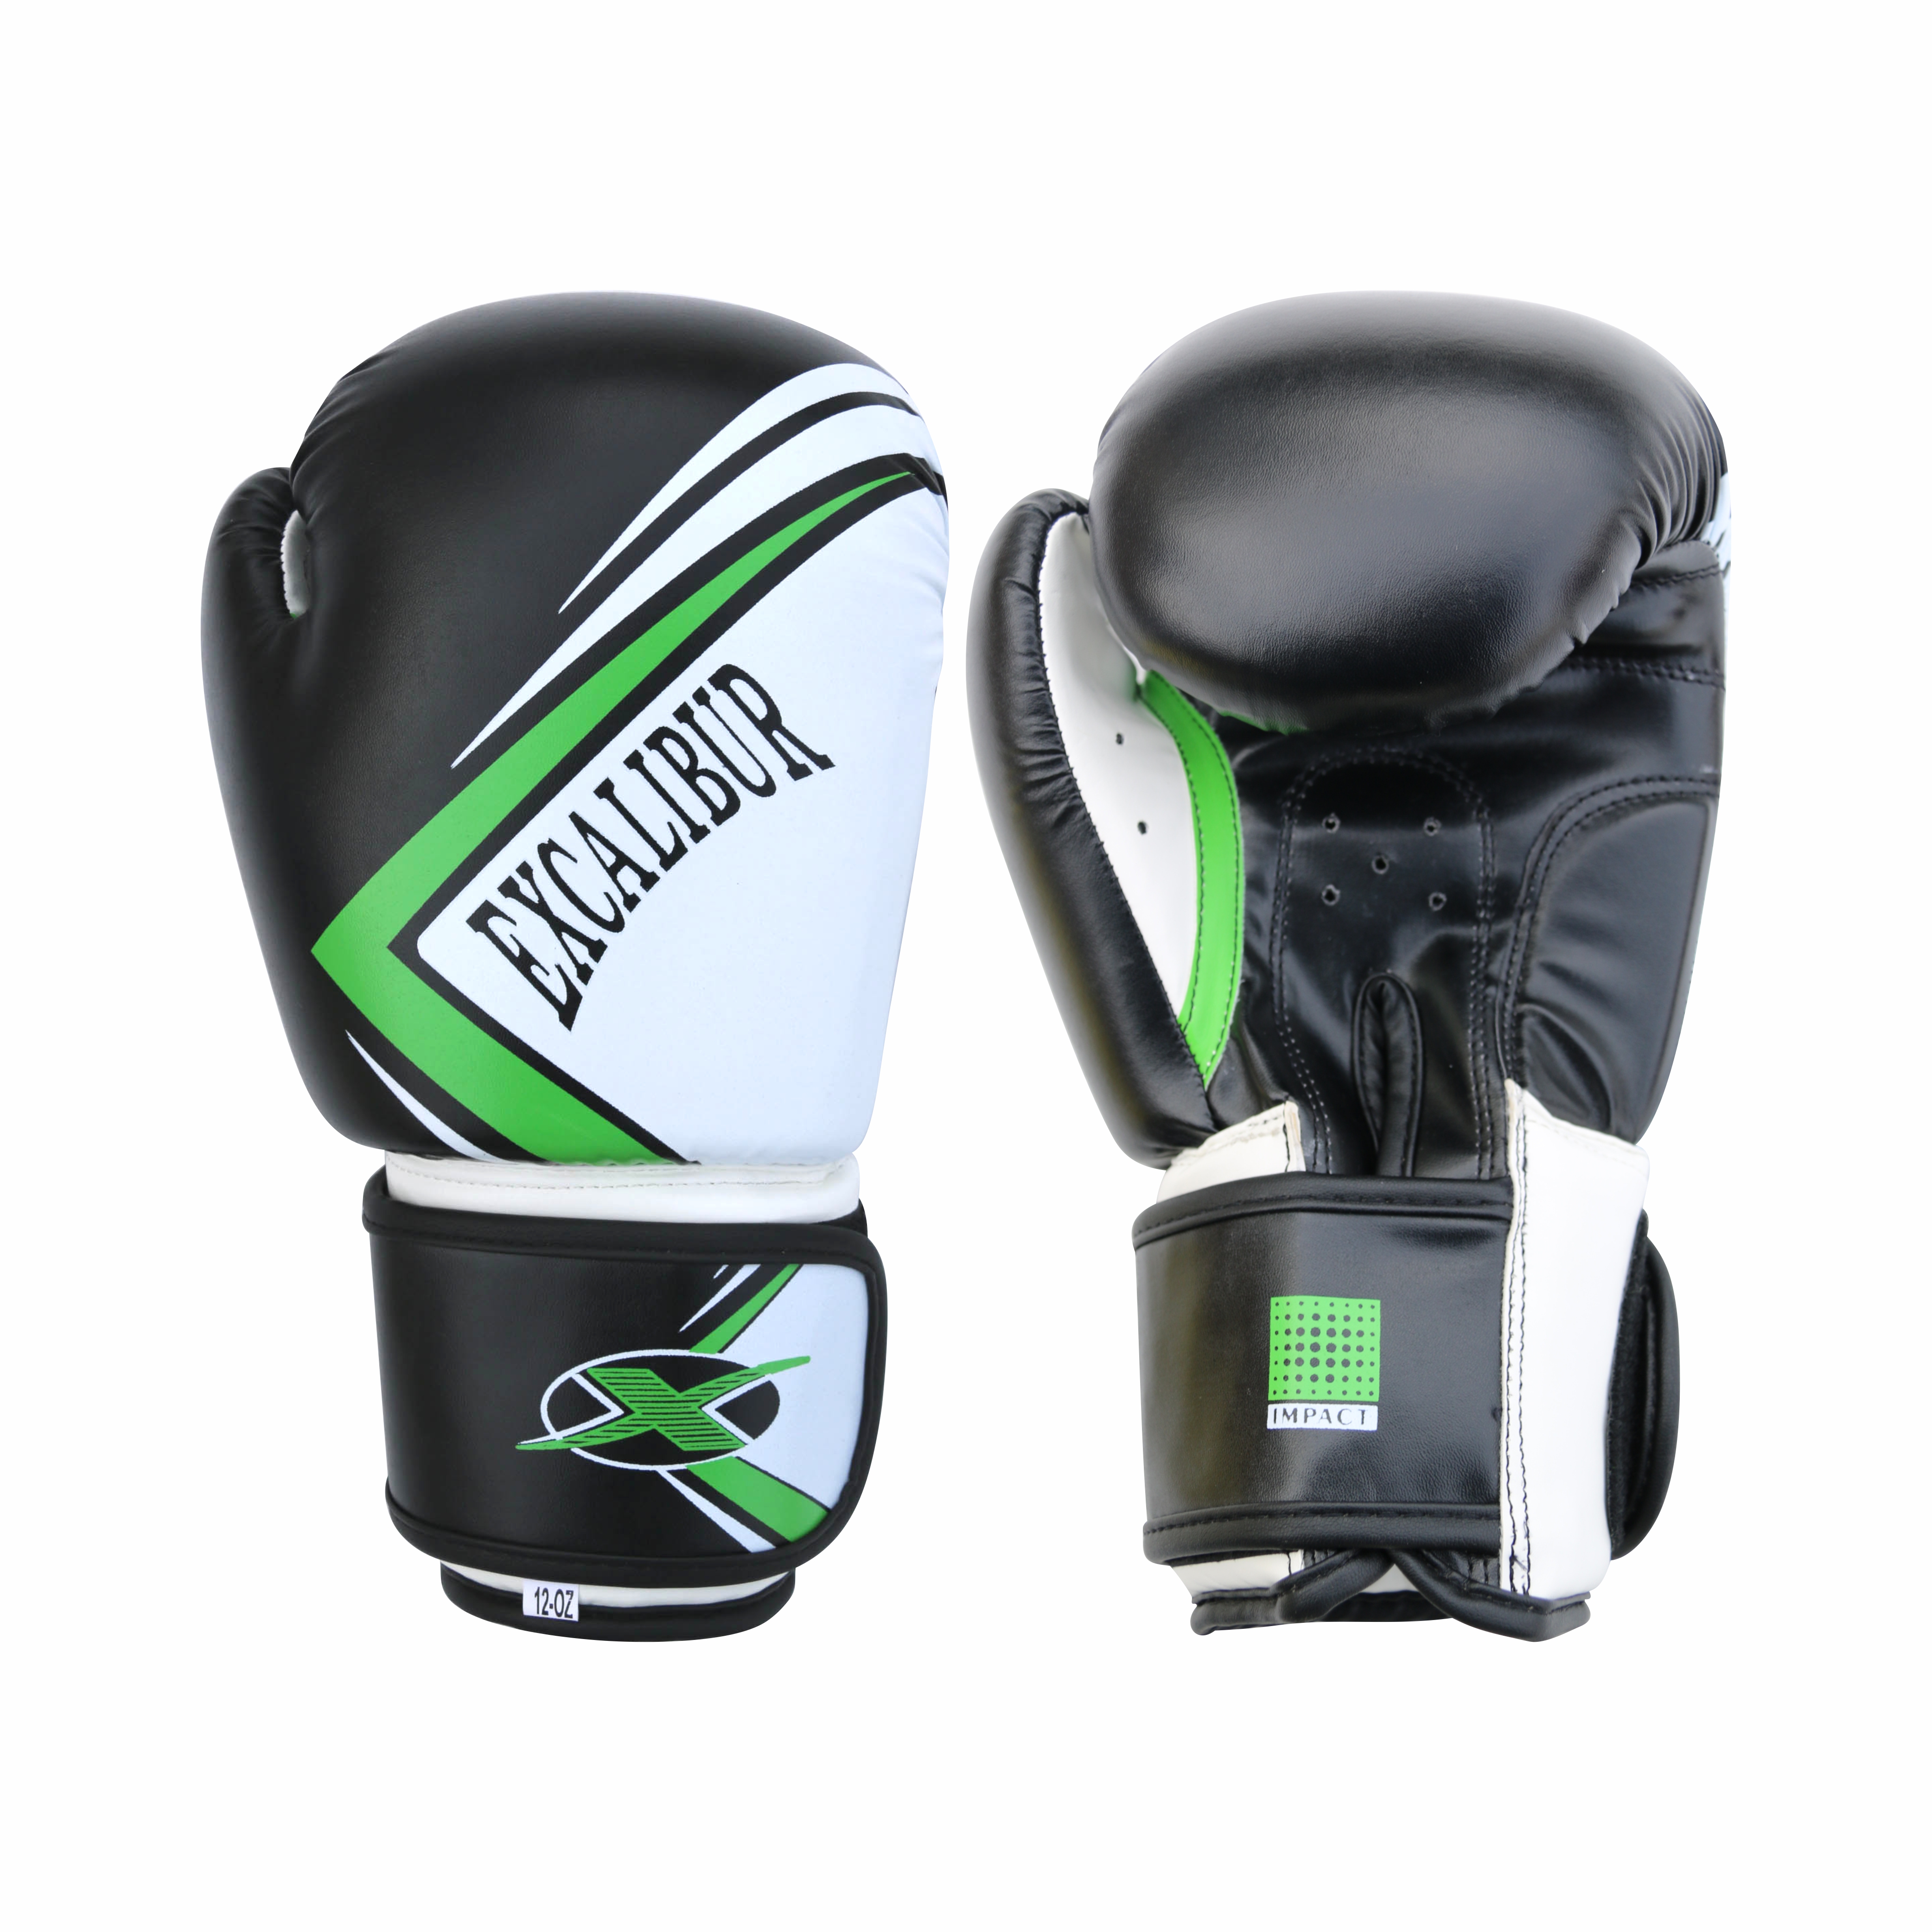 Dn-2000 Boxing Gloves